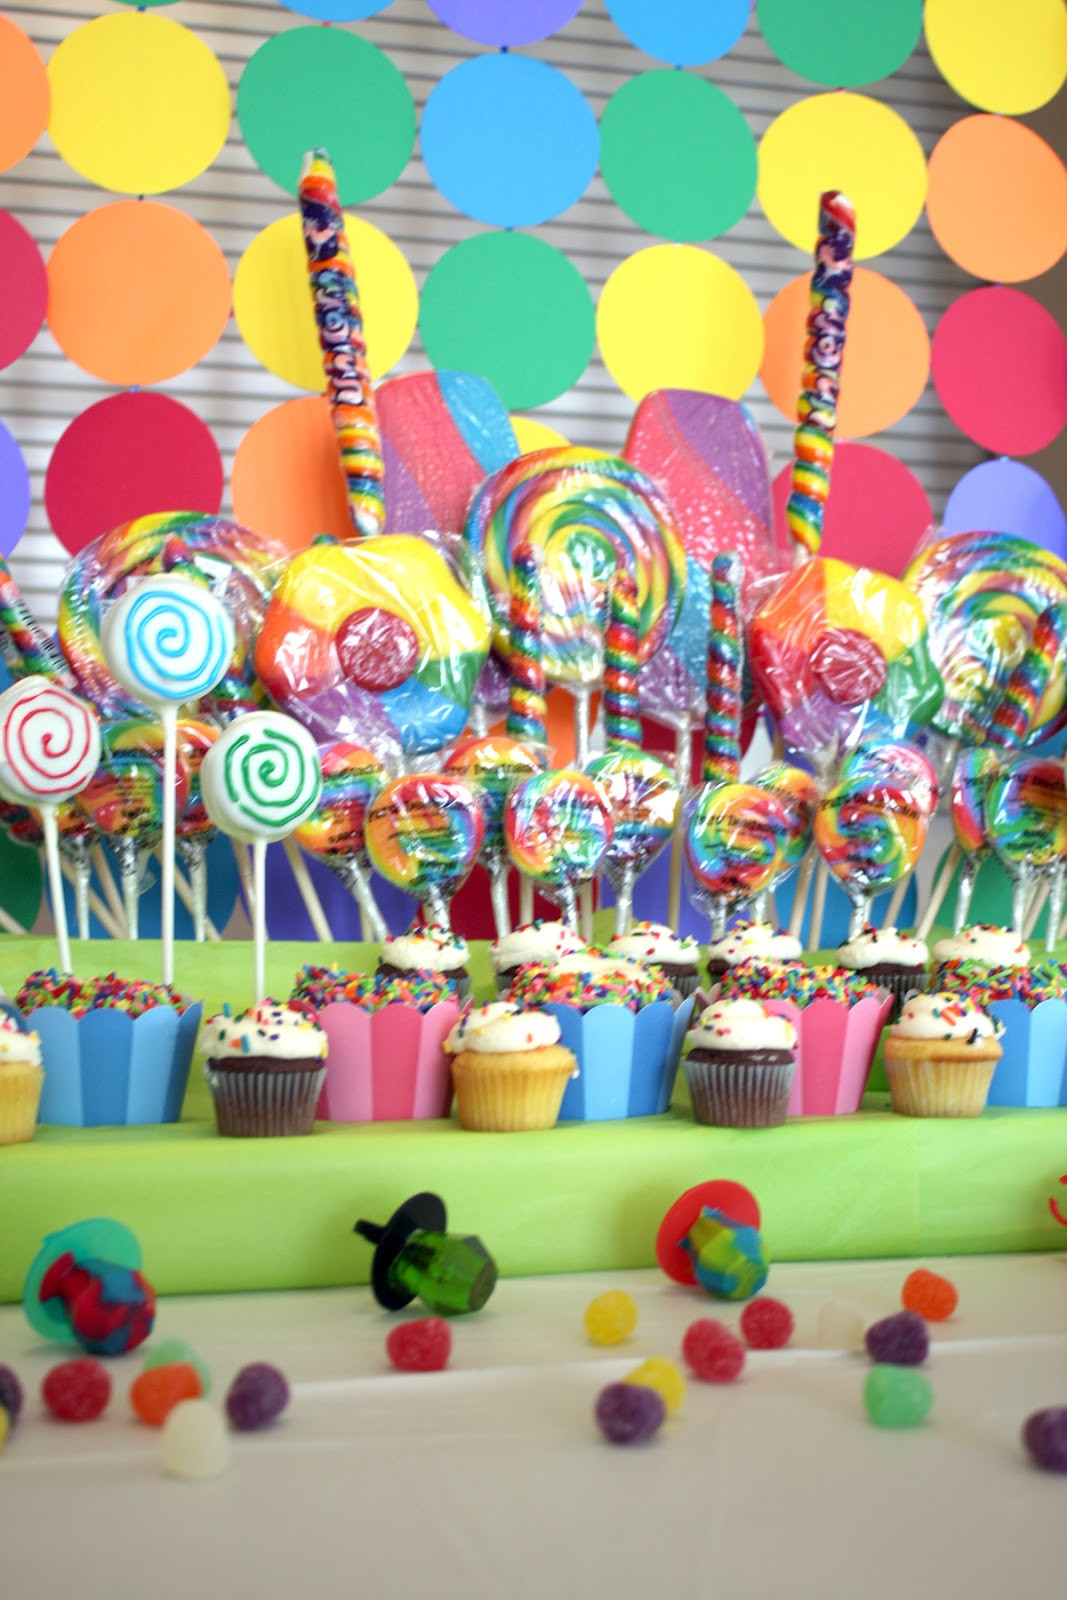 Candyland Birthday Decorations
 The Everyday Posh Candy Land Birthday Party